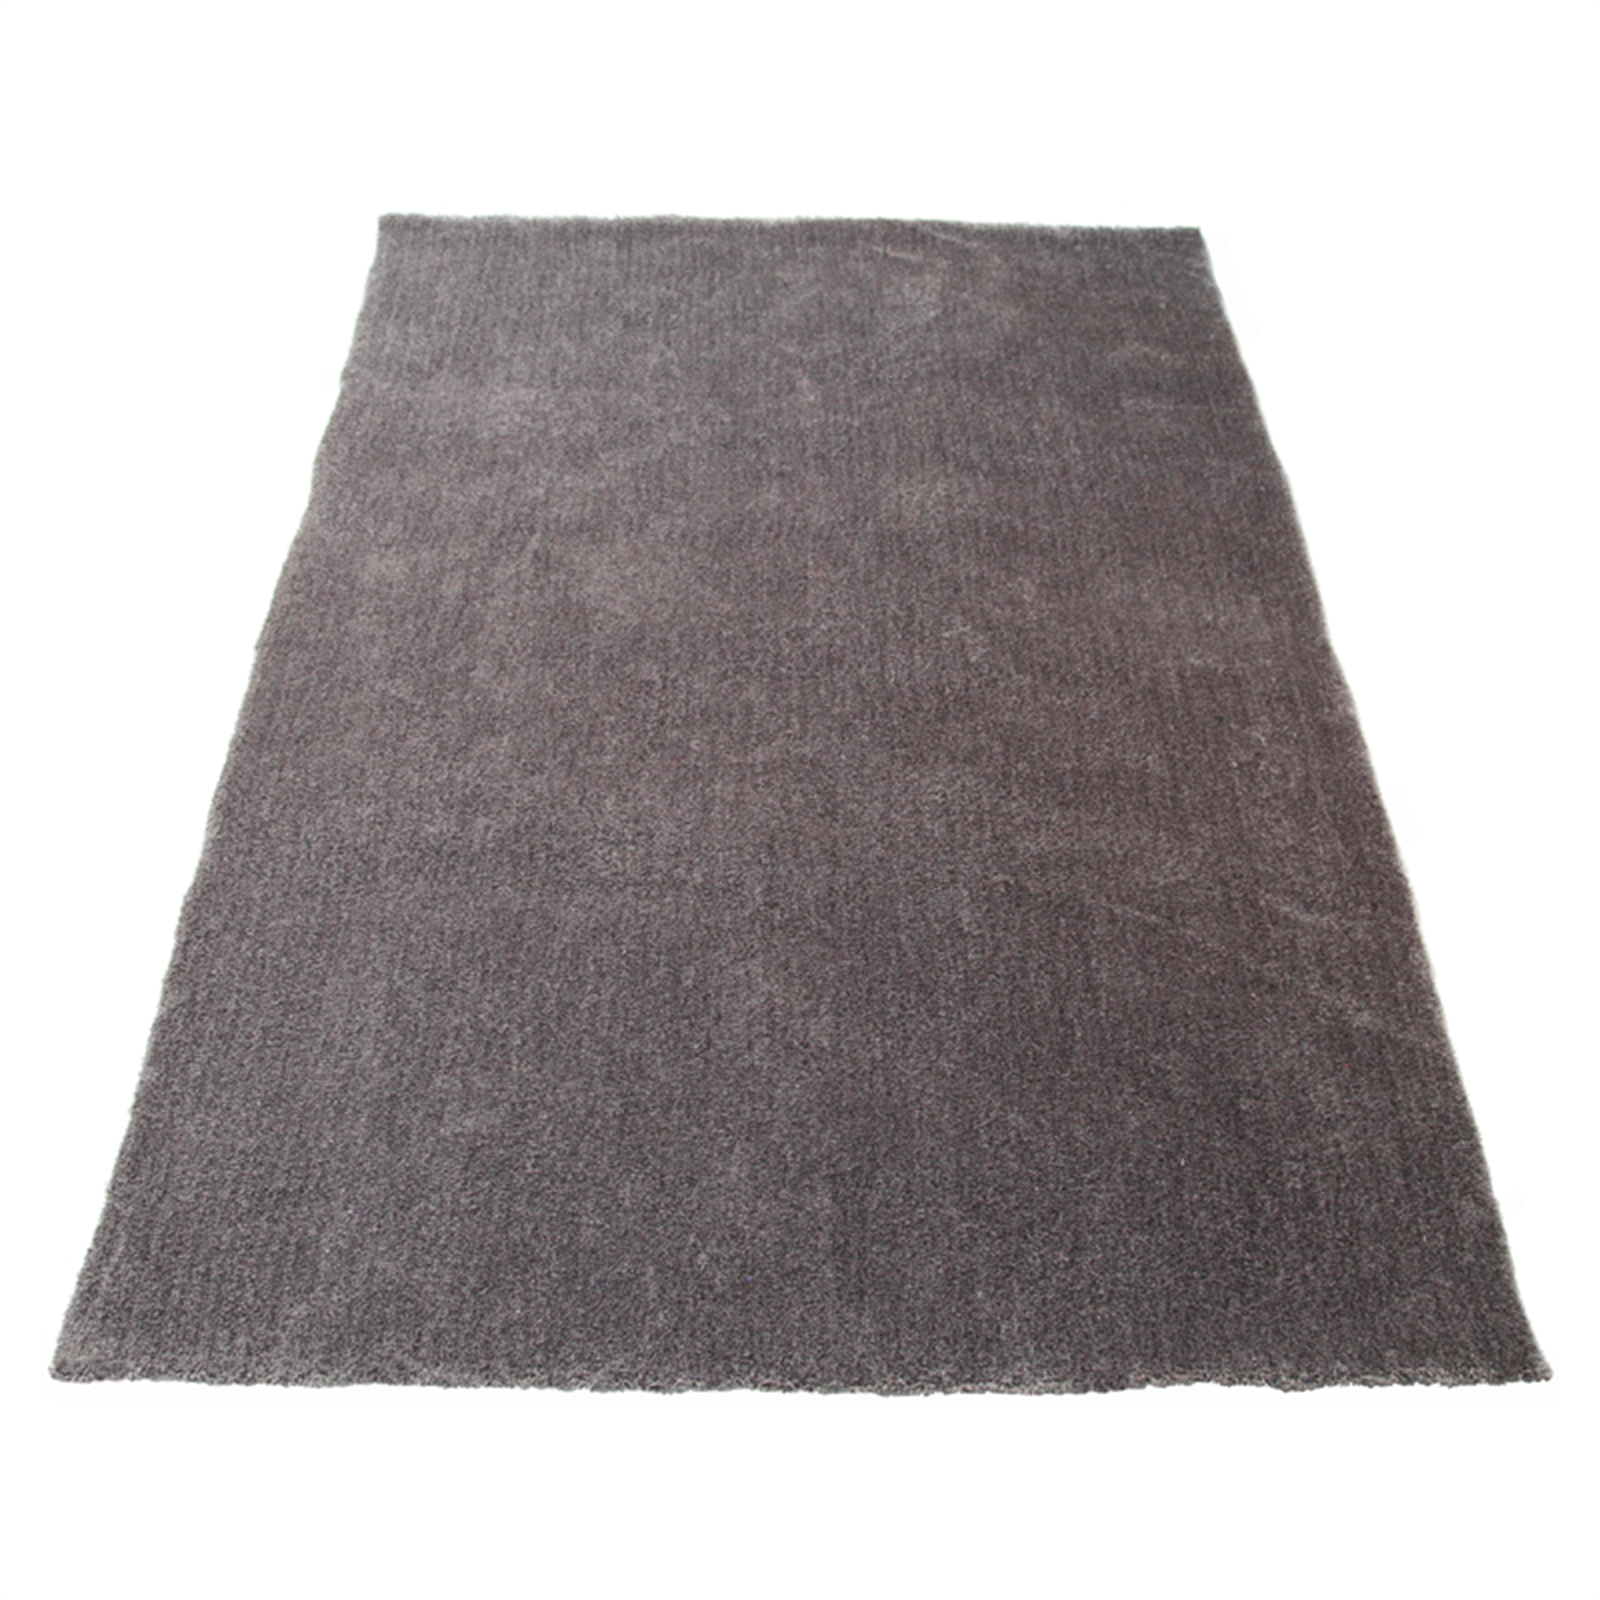 The Estate Collection 160 x 230cm Grey Berlin Rug